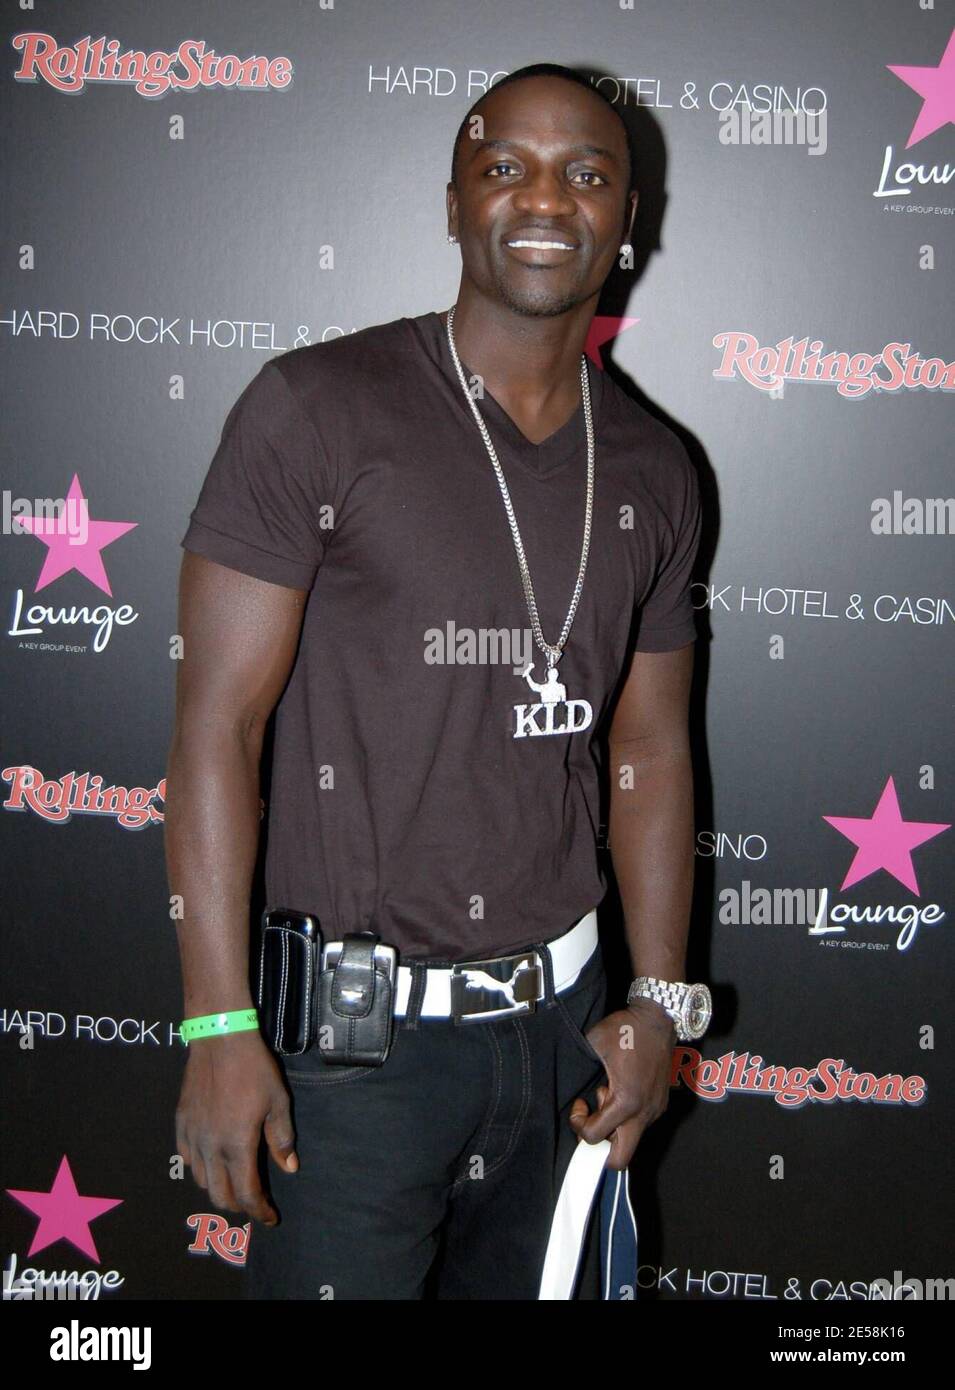 Akon attends the first day of the Star Lounge gifting and hospitality suite in honor of Rolling Stone's 40th Anniversary. Hard Rock Hotel, Las Vegas, NV. 9/7/07.    [[cas]] Stock Photo